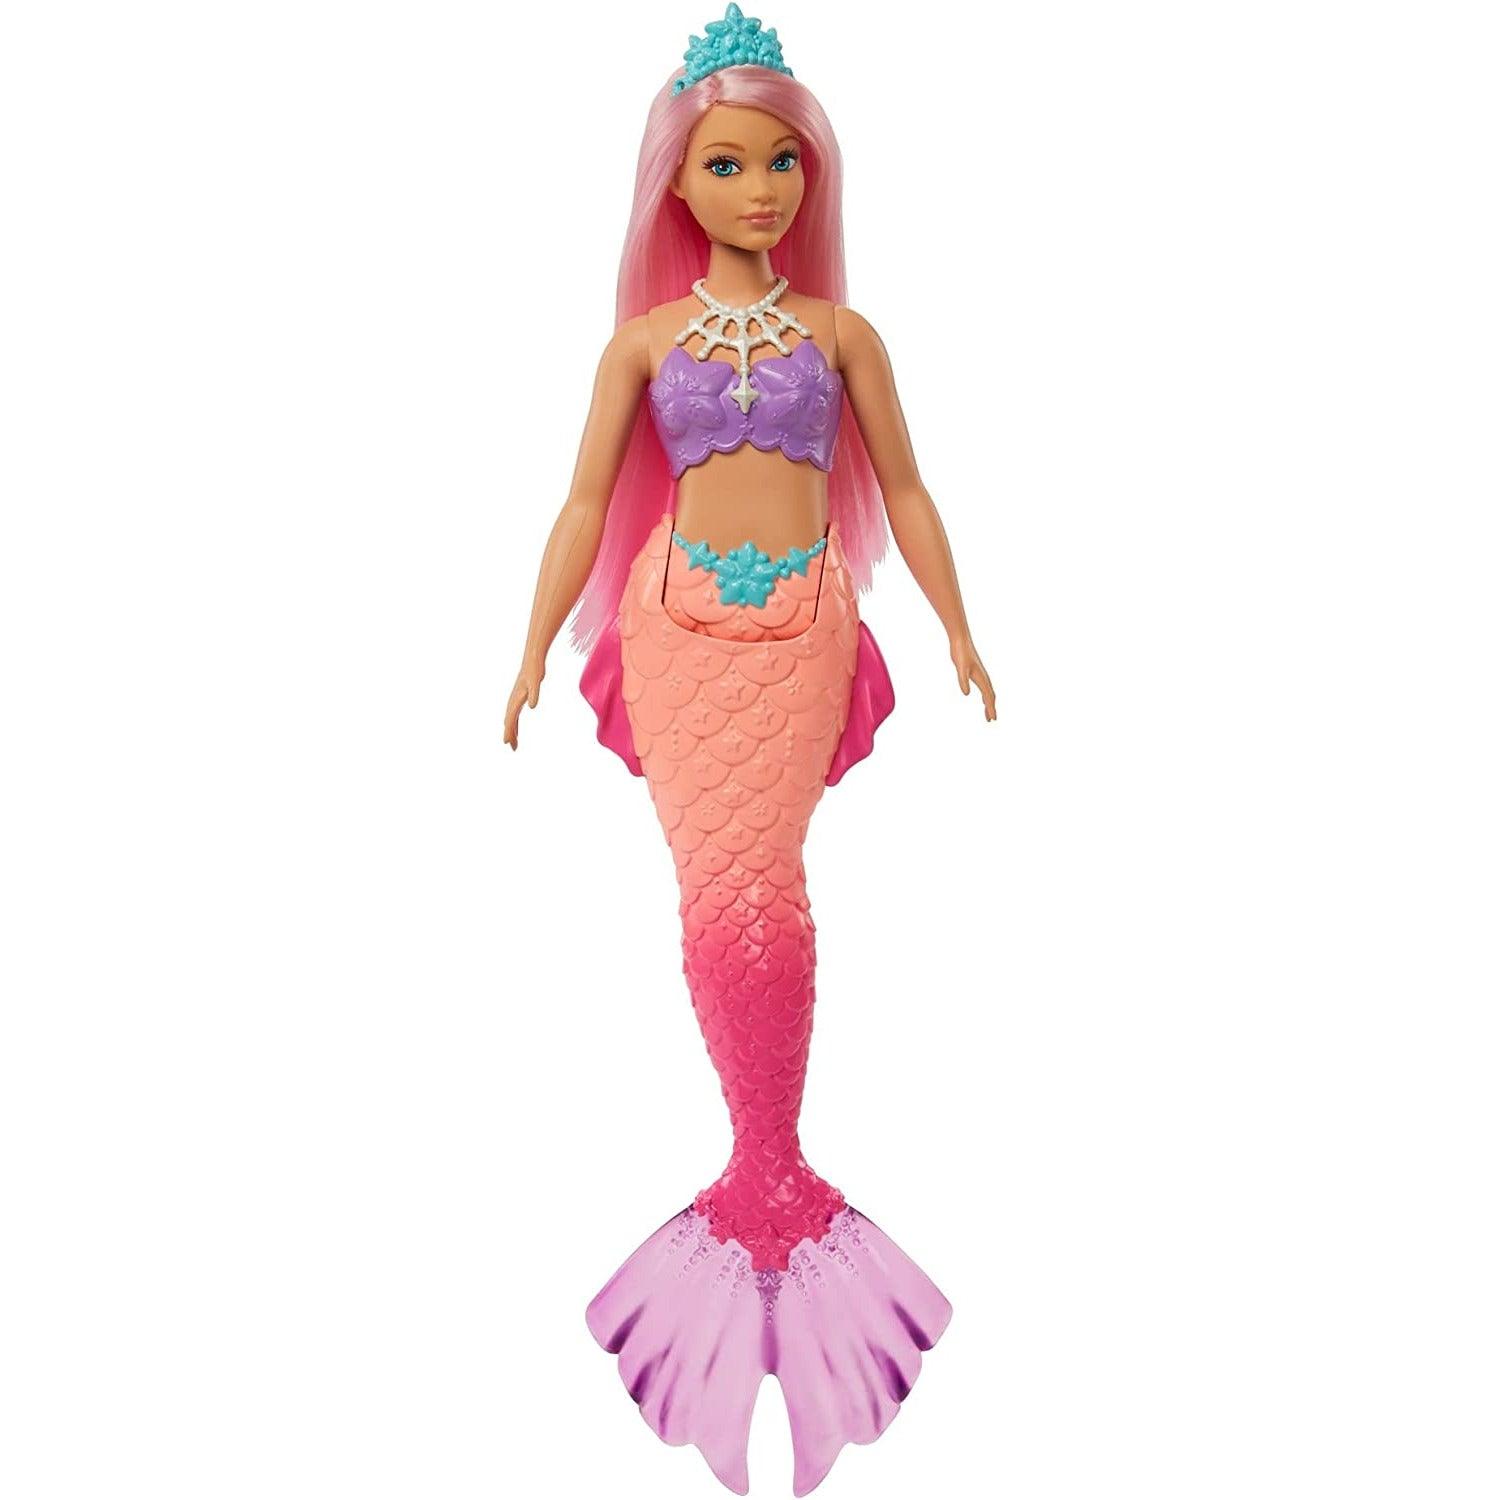 Barbie Dreamtopia Mermaid Doll (Curvy, Pink Hair) with Pink Ombre Mermaid Tail and Tiara - BumbleToys - 5-7 Years, Barbie, Fashion Dolls & Accessories, Girls, Mermaid, Pre-Order